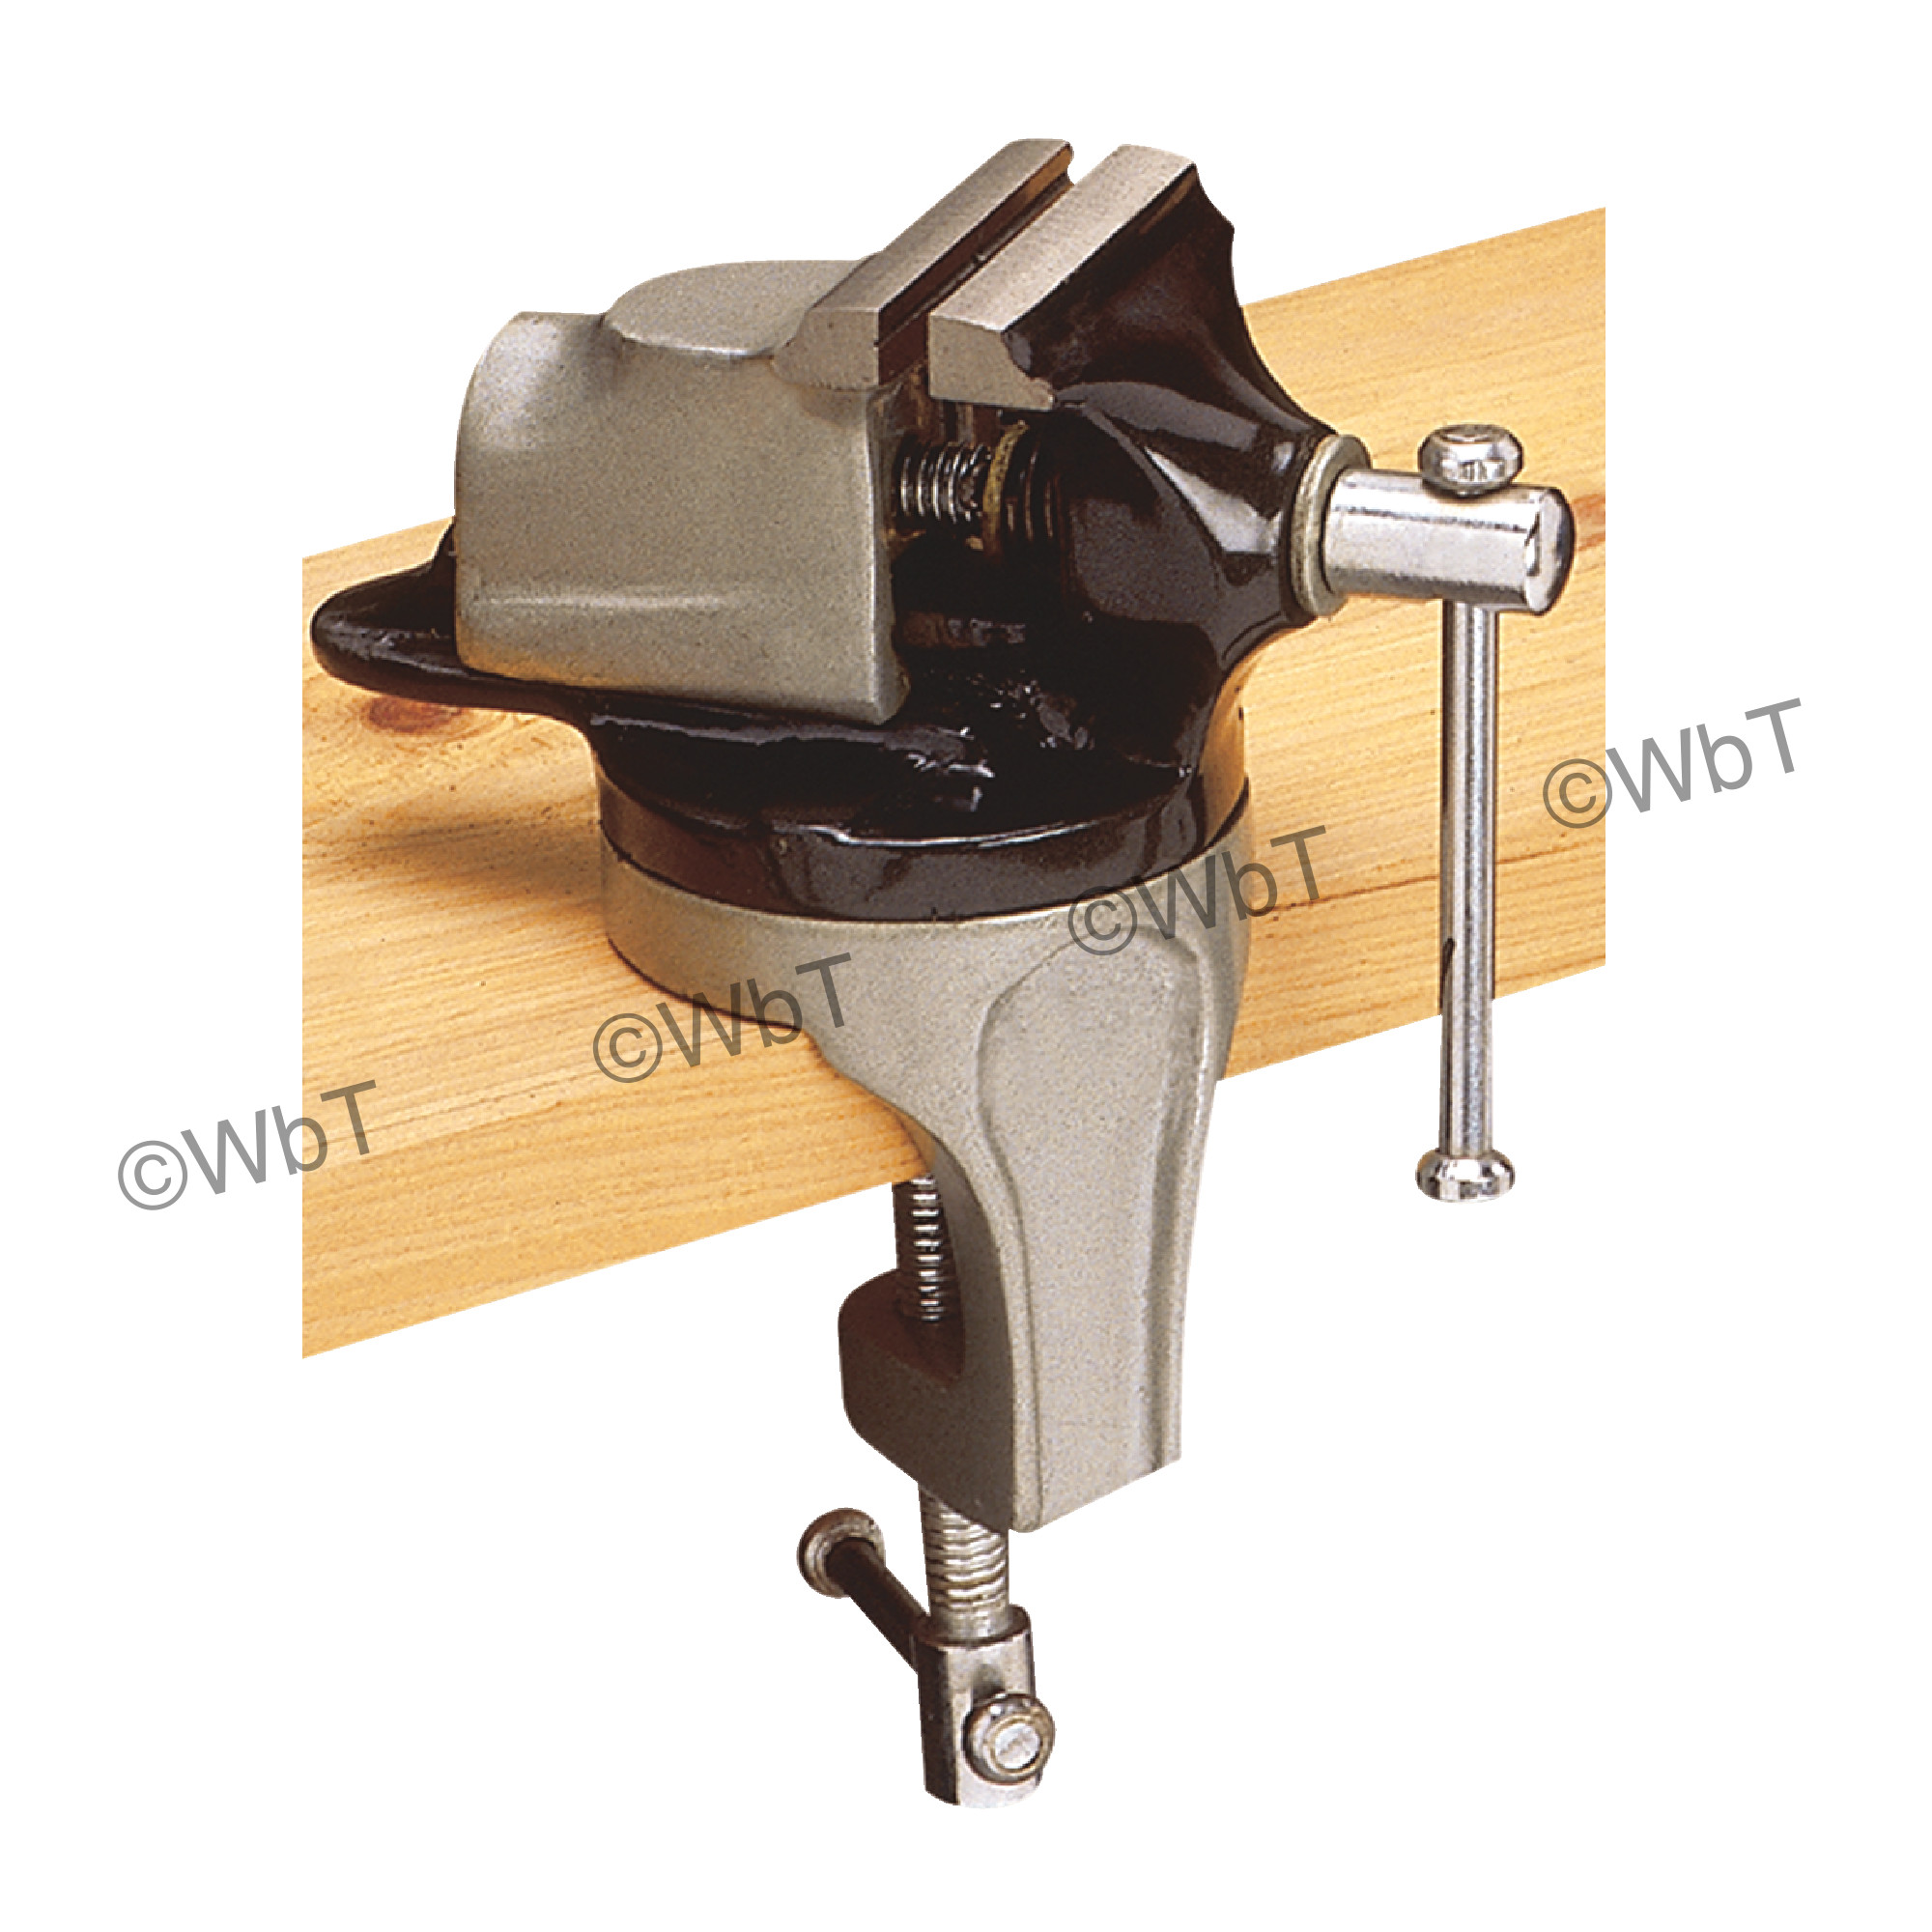 2" Baby Bench Vise With Swivel Base